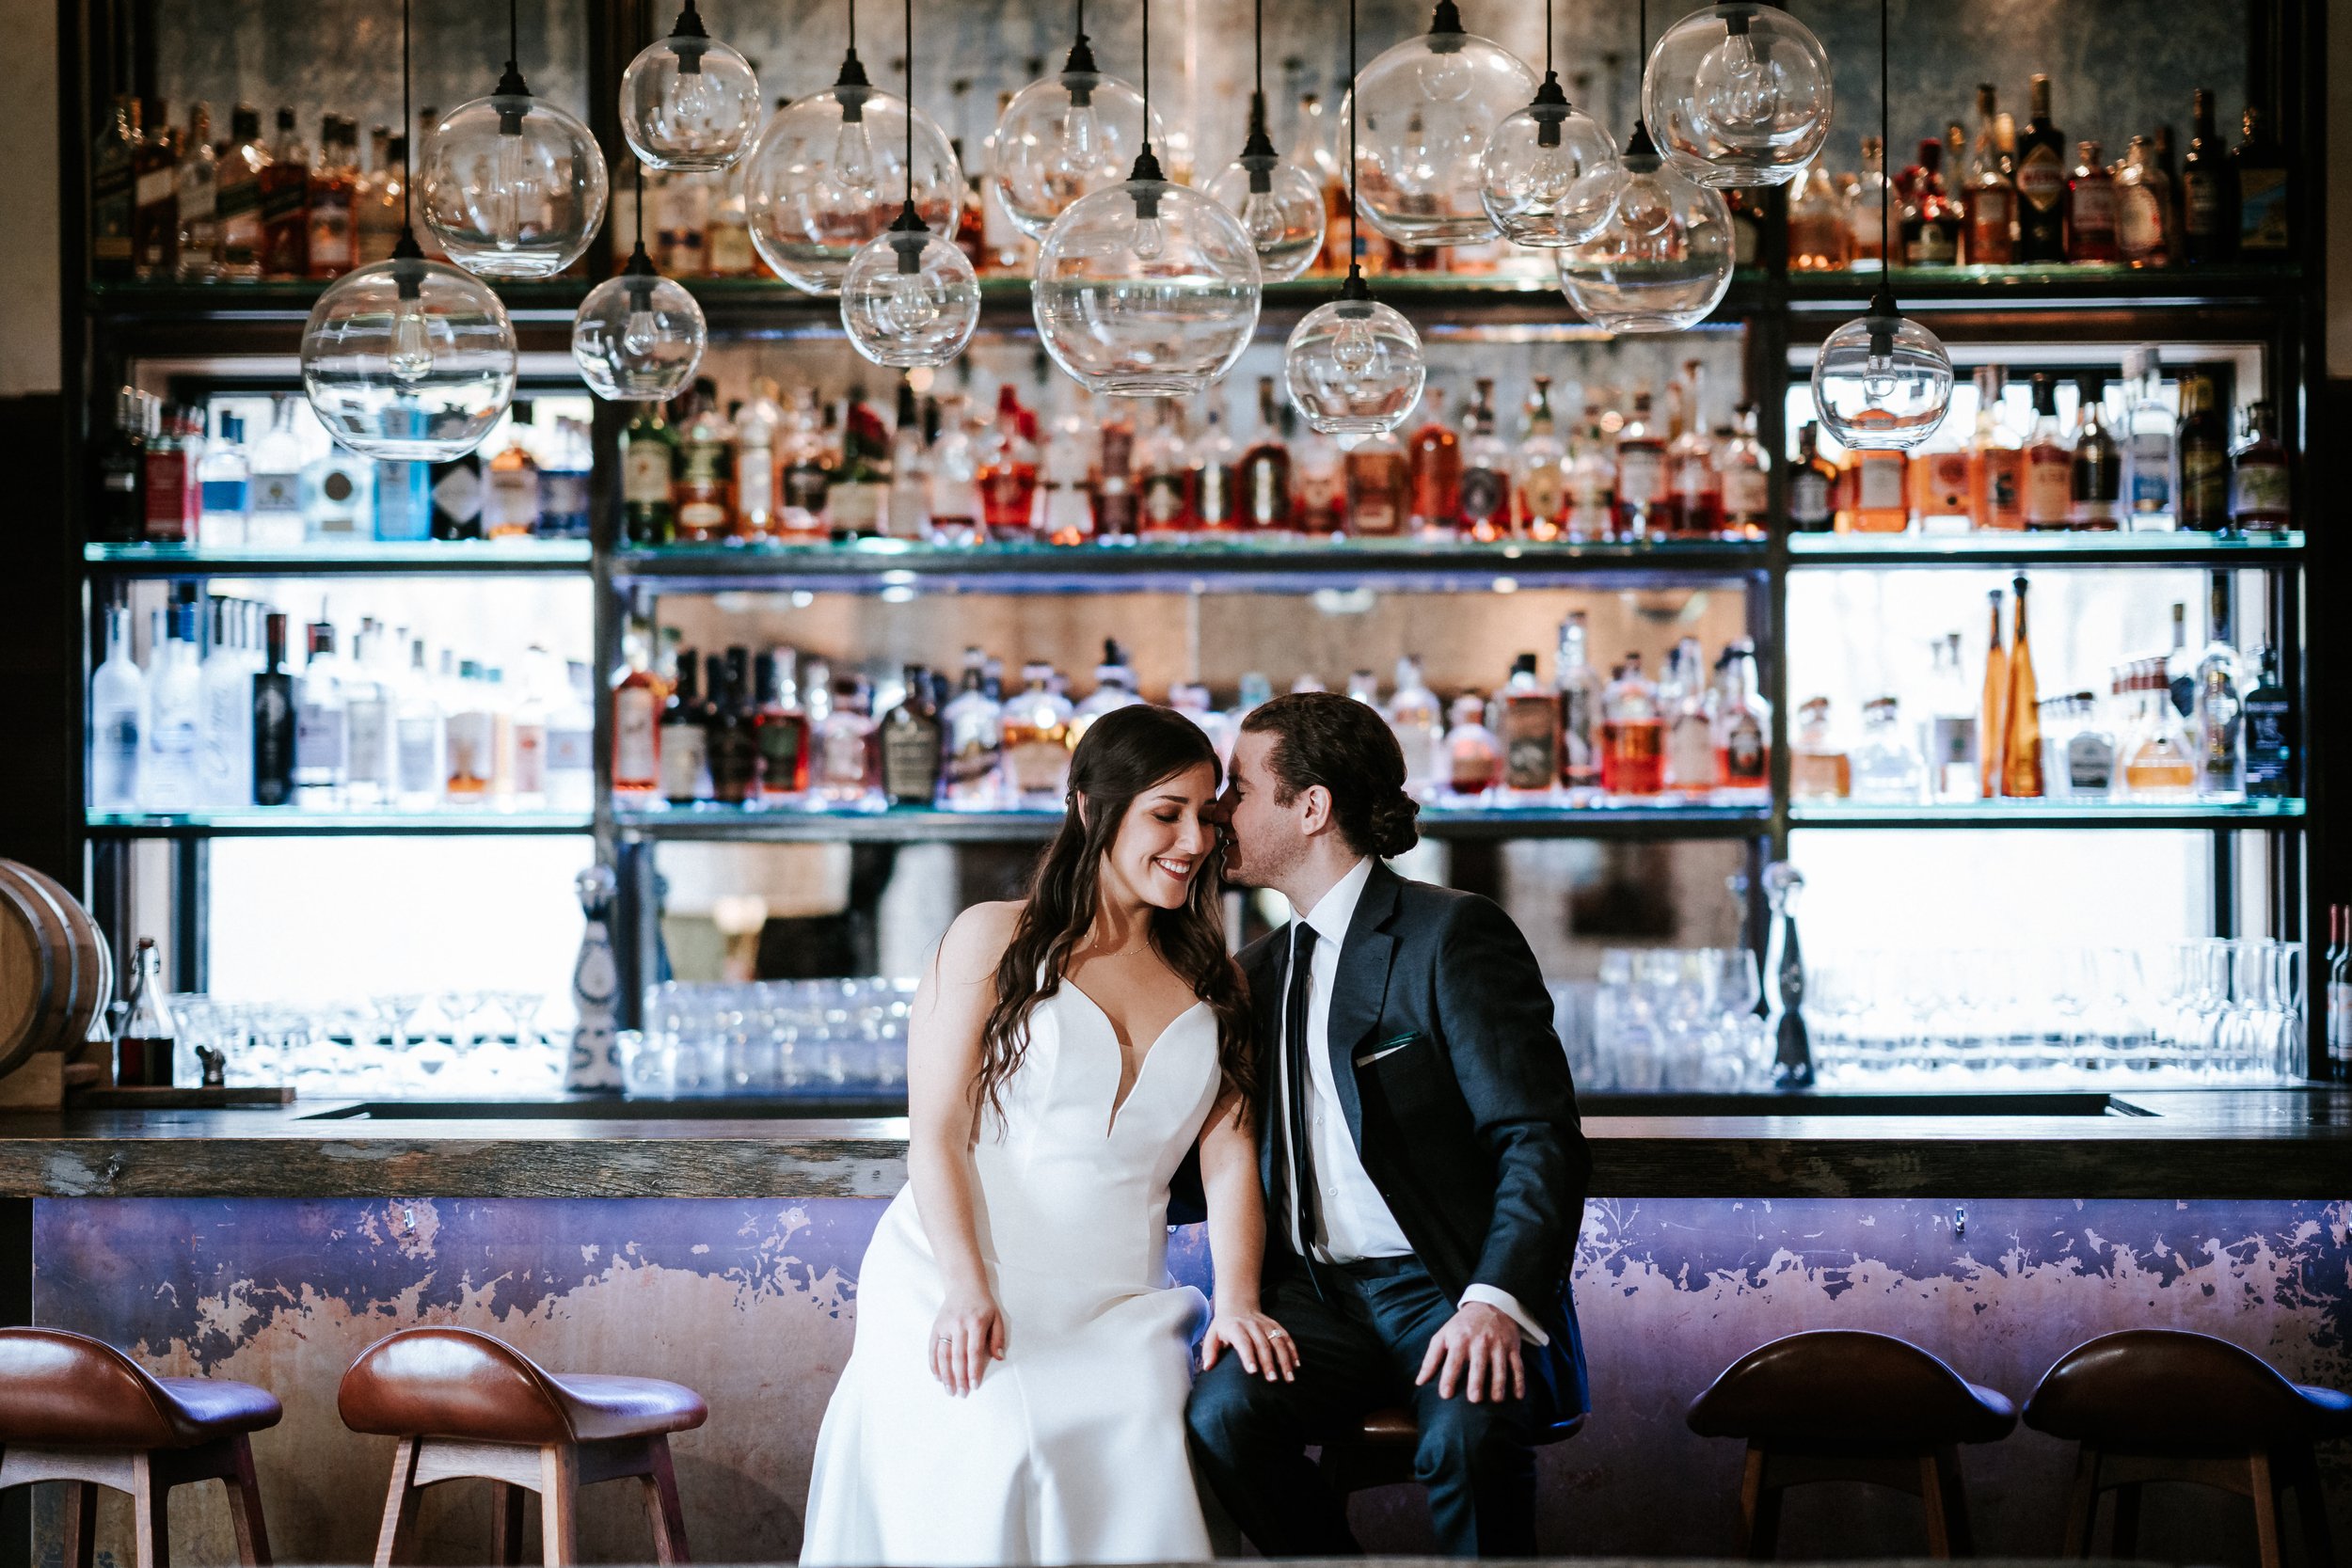 Bride and groom first look inside a bar in Beacon, New York